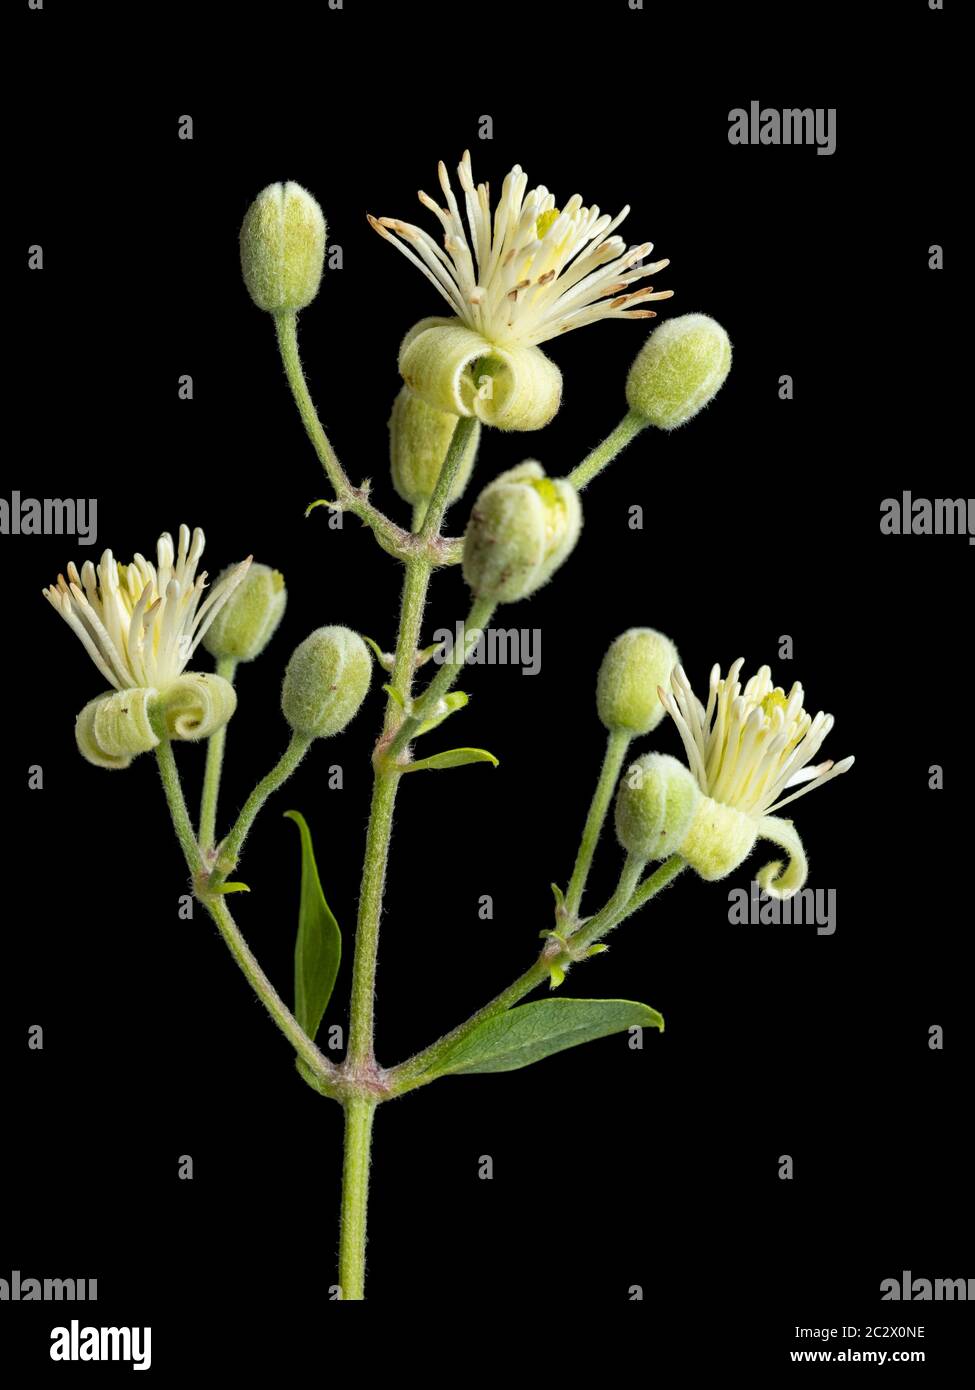 Early summer flowers of the UK climbing wildflower, Clematis vitalba, traveller's joy, on a black background Stock Photo